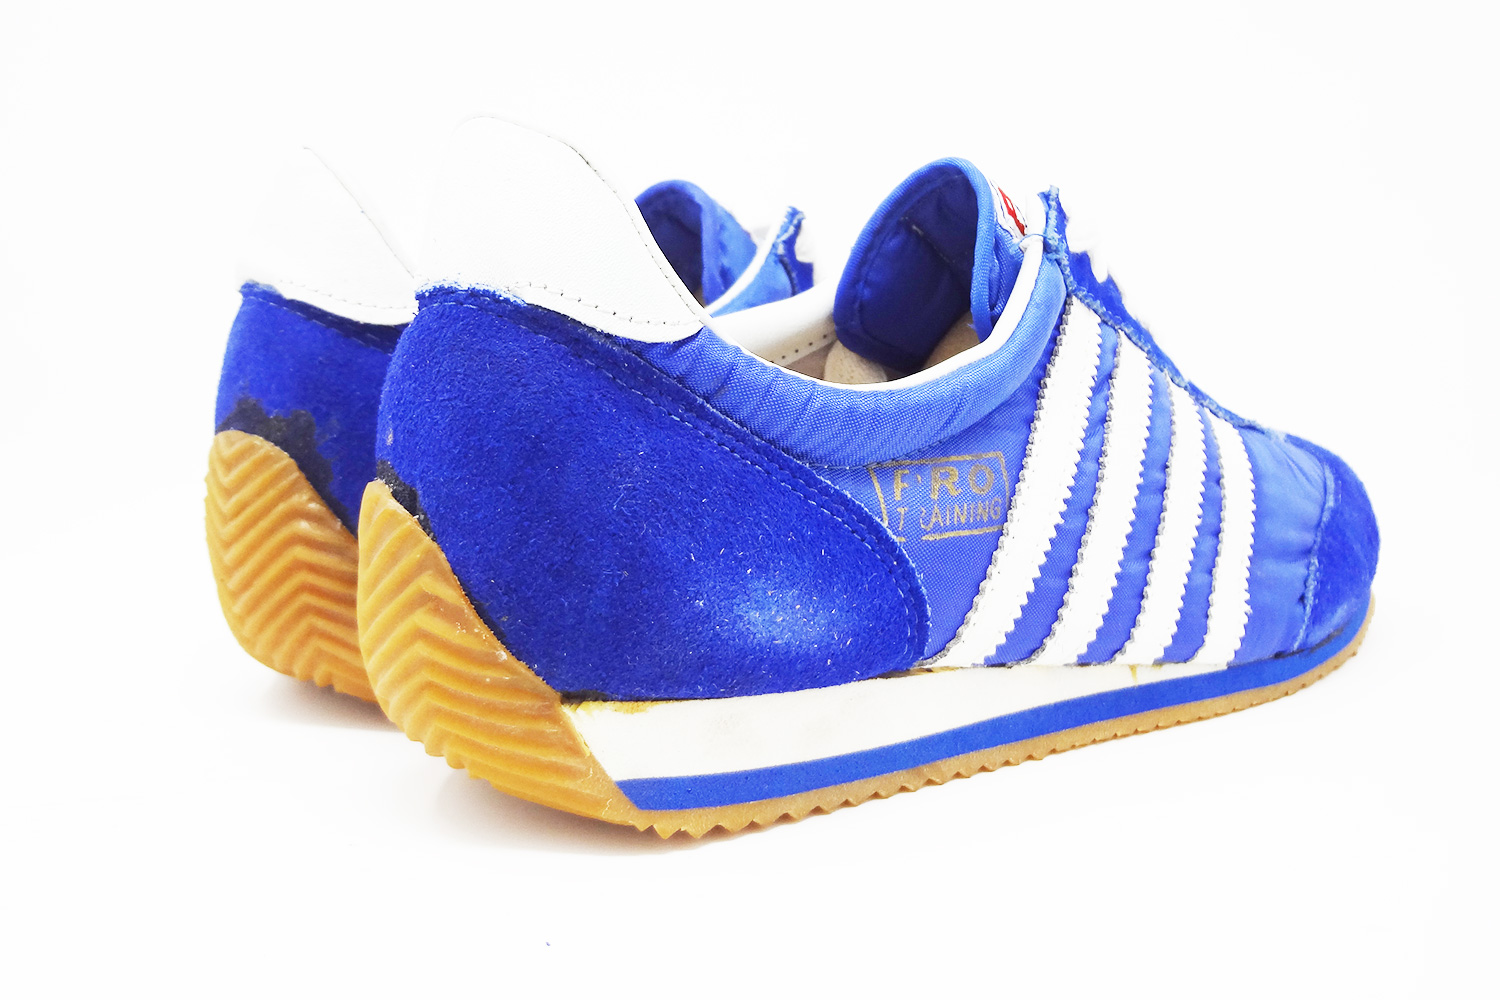 Pro Training classic Adidas style stripes sneakers rear 3-4 view @ The Deffest